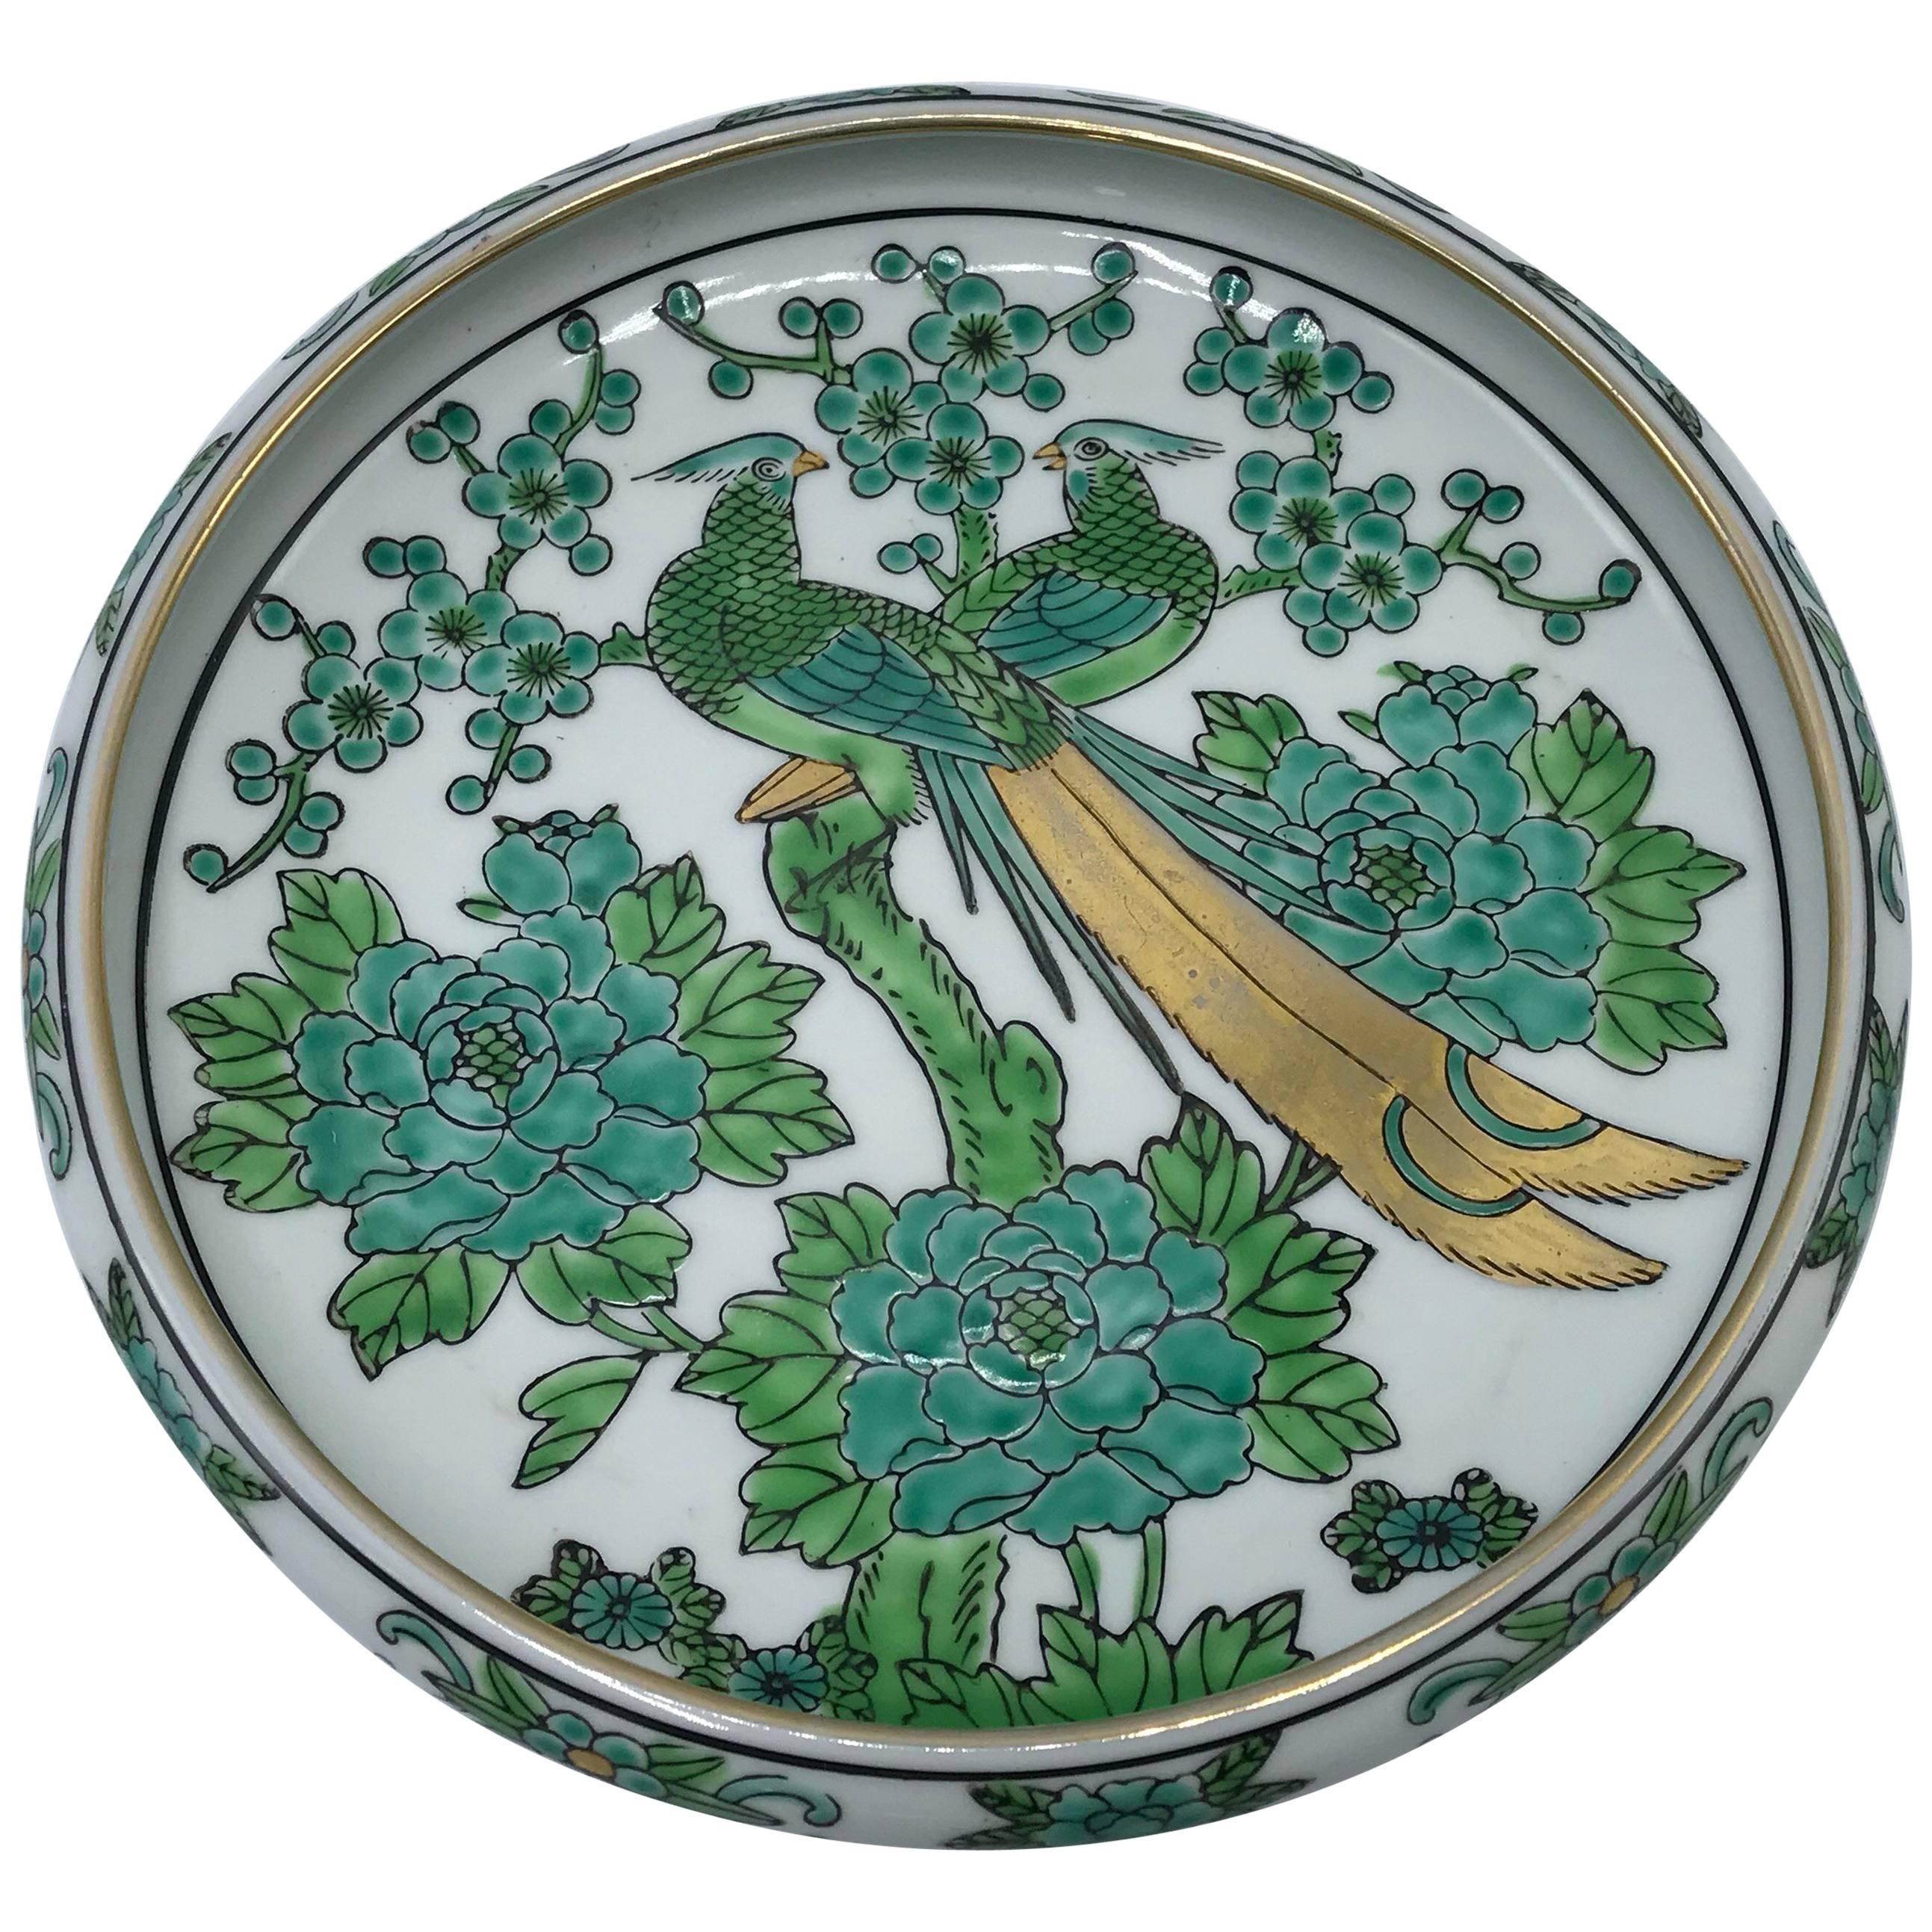 1960s Gold Imari Green and White Dish with Peacock Motif